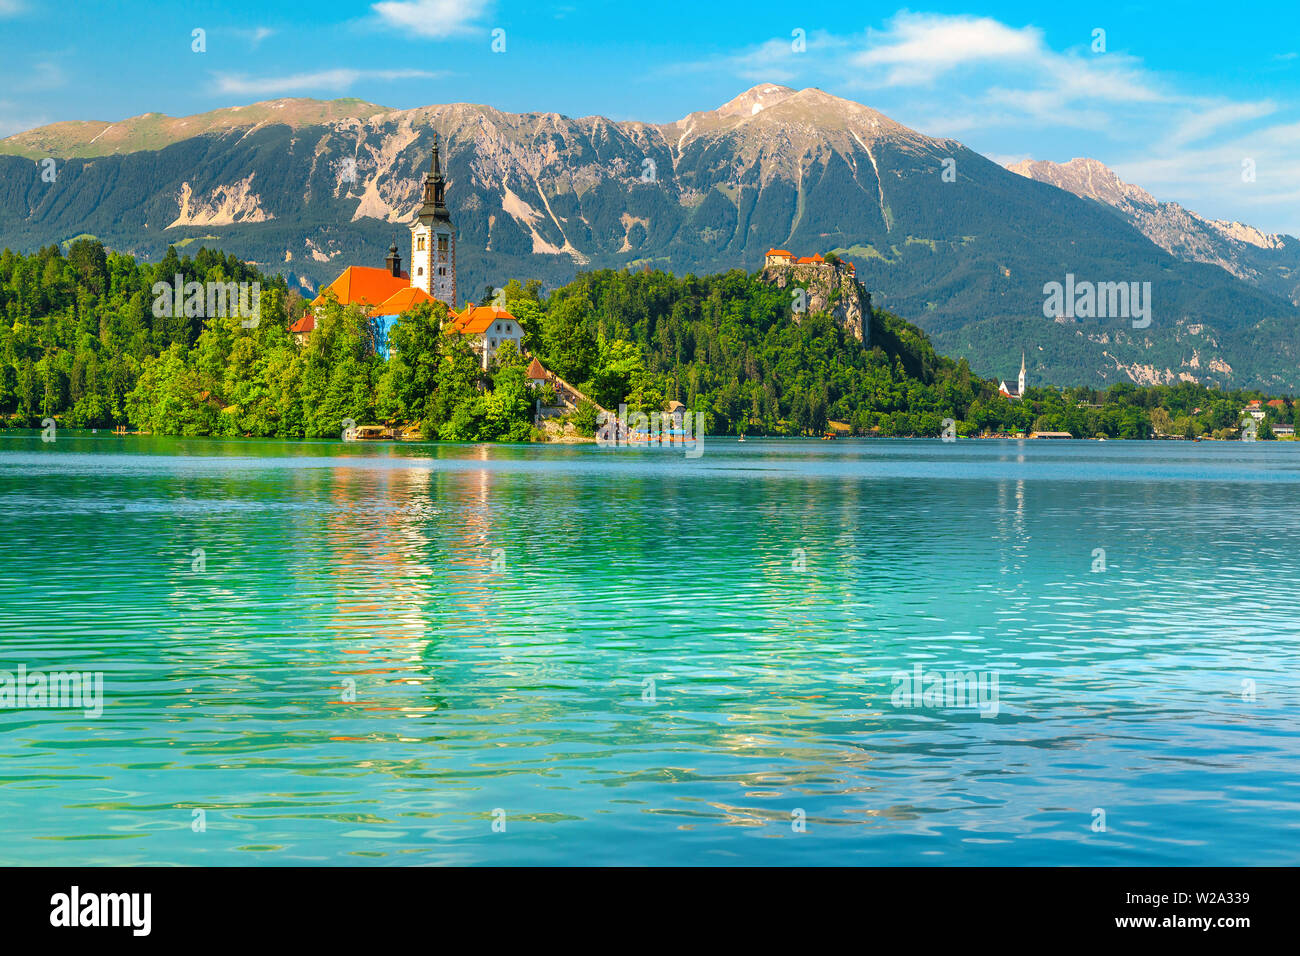 Wonderful travel and touristic place. Famous and spectacular lake Bled with picturesque Pilgrimage church on small island, Bled, Slovenia, Europe Stock Photo